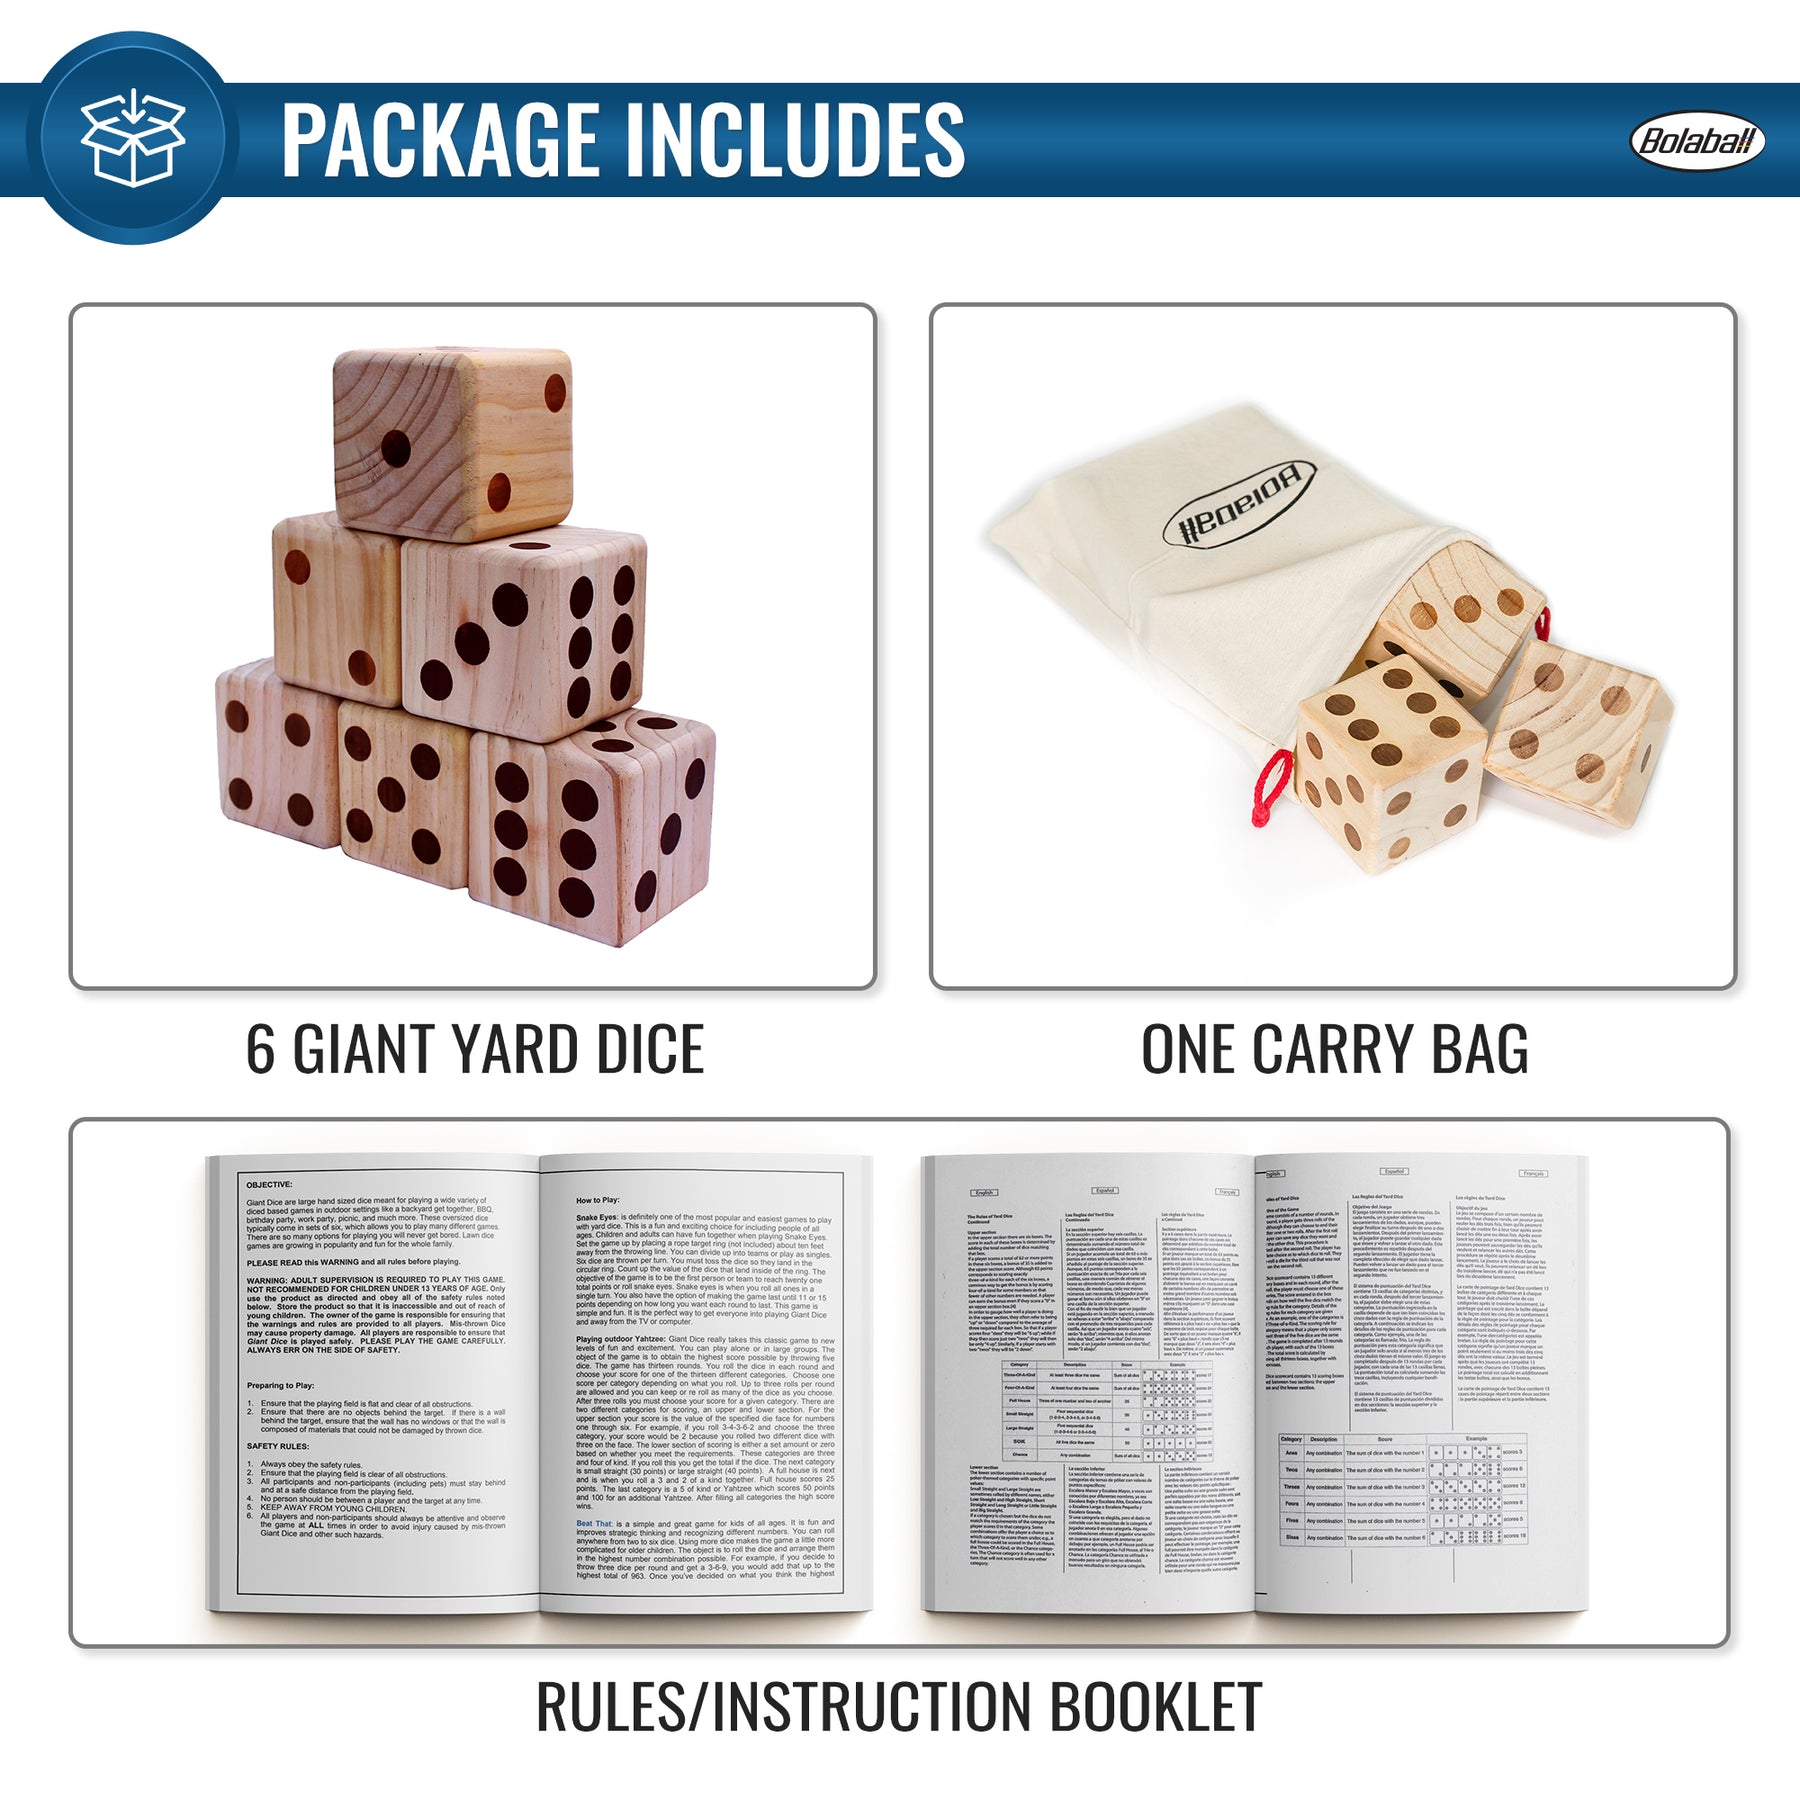 Jumbo Outdoor Wooden Dice: Perfect Family Yard Game